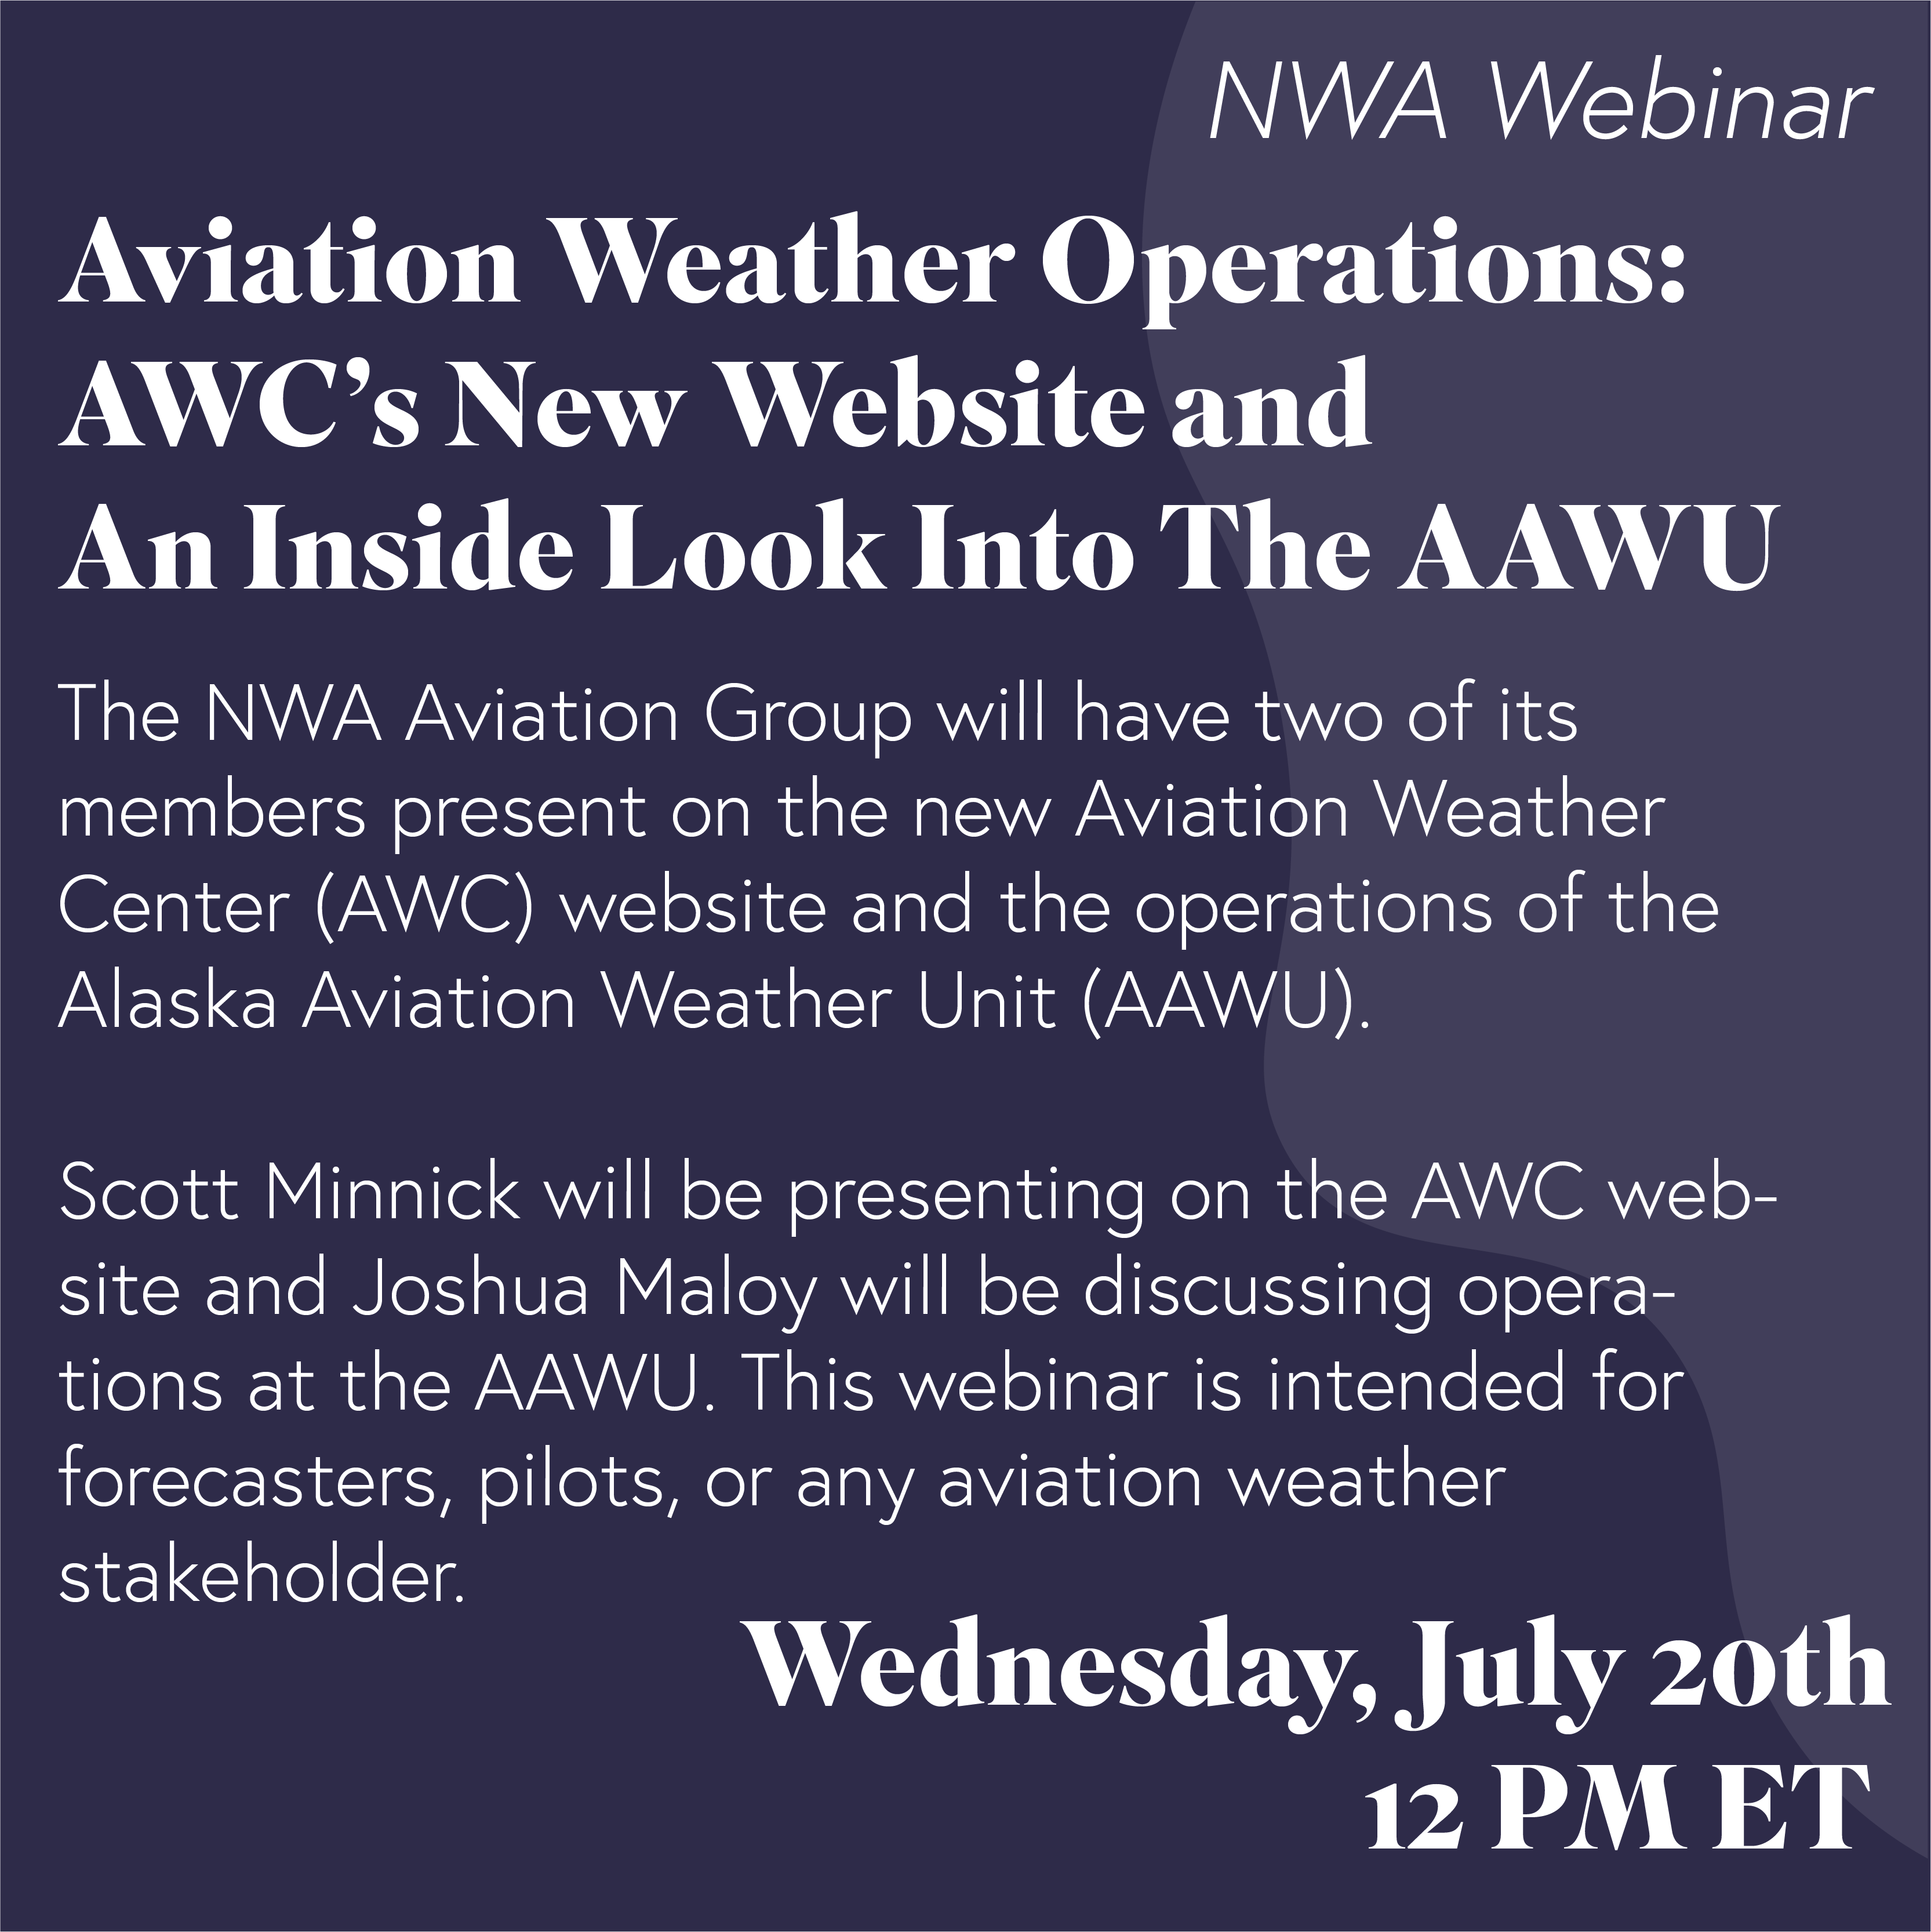 Aviation Weather Operations: AWC’s New Website And An Inside Look Into The AAWU